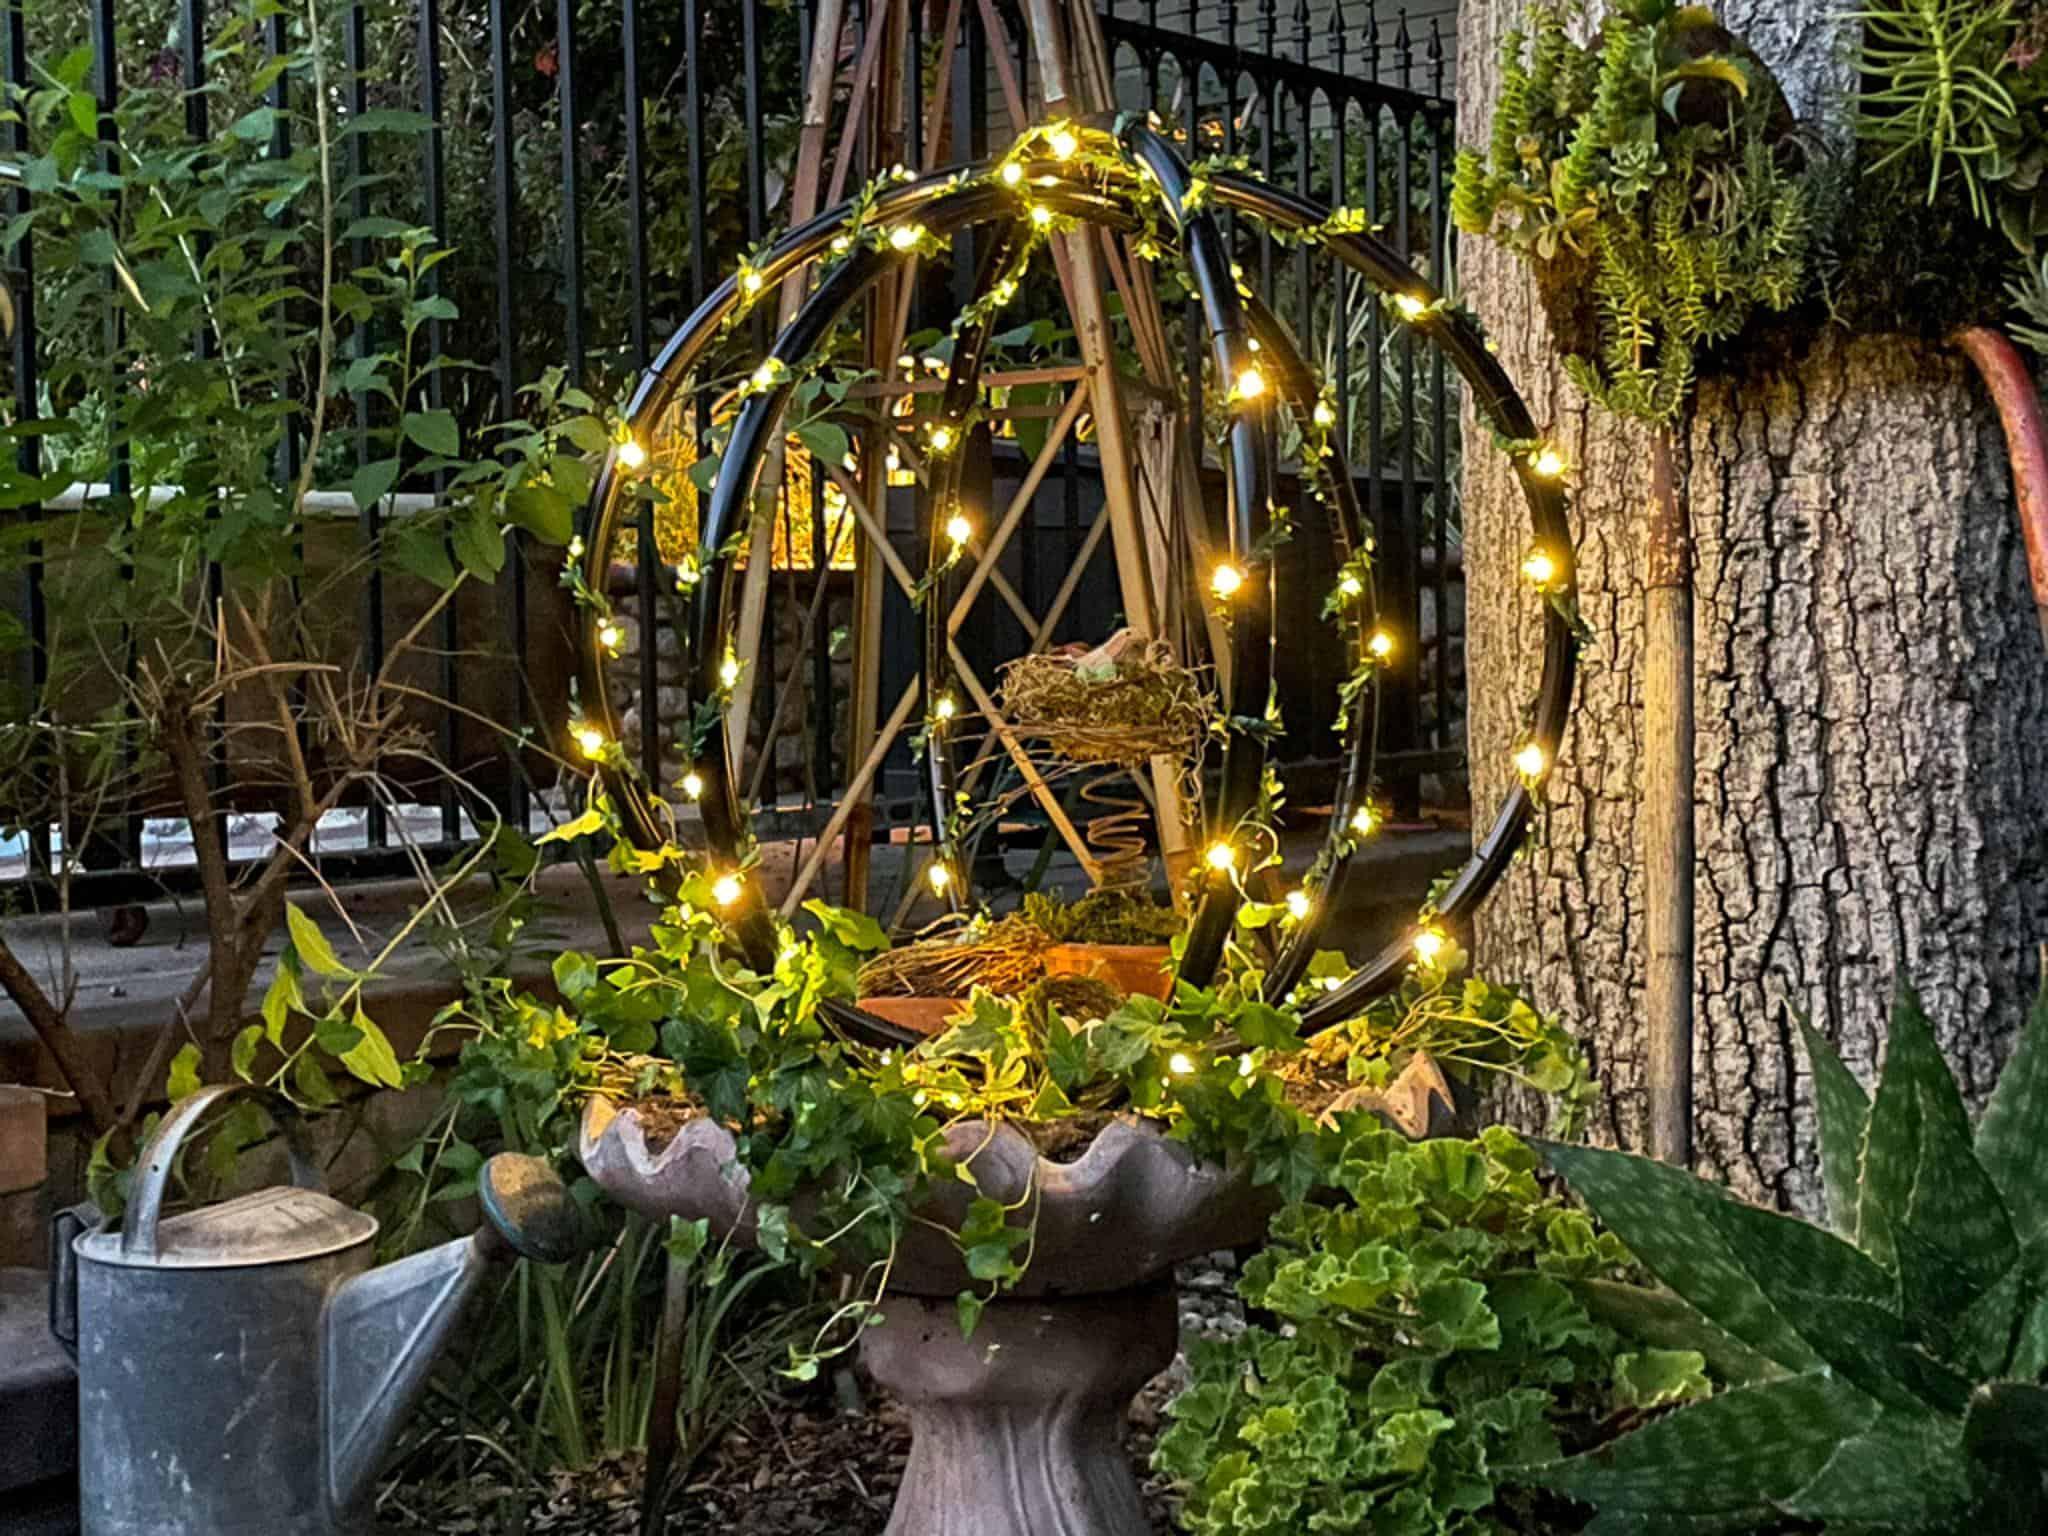 How to Make Lighted Garden Spheres Out of Hula Hoops